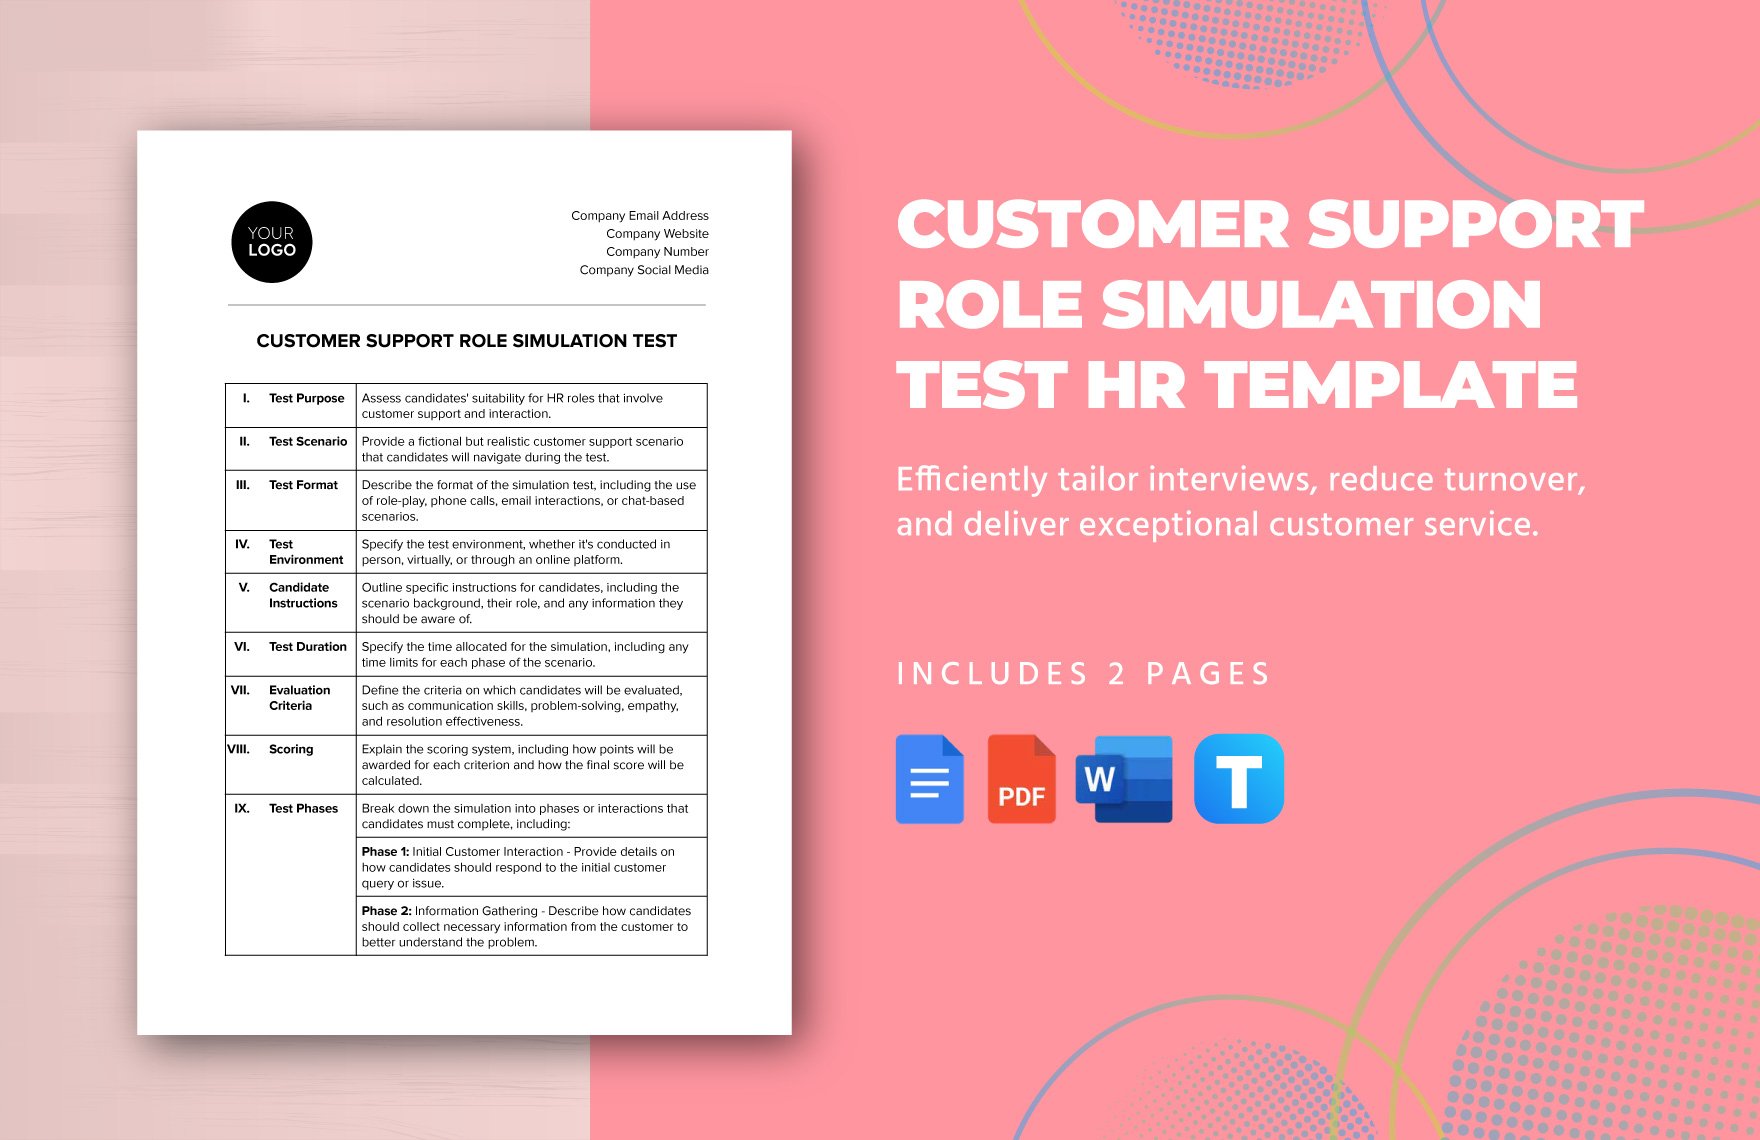 Customer Support Role Simulation Test HR Template